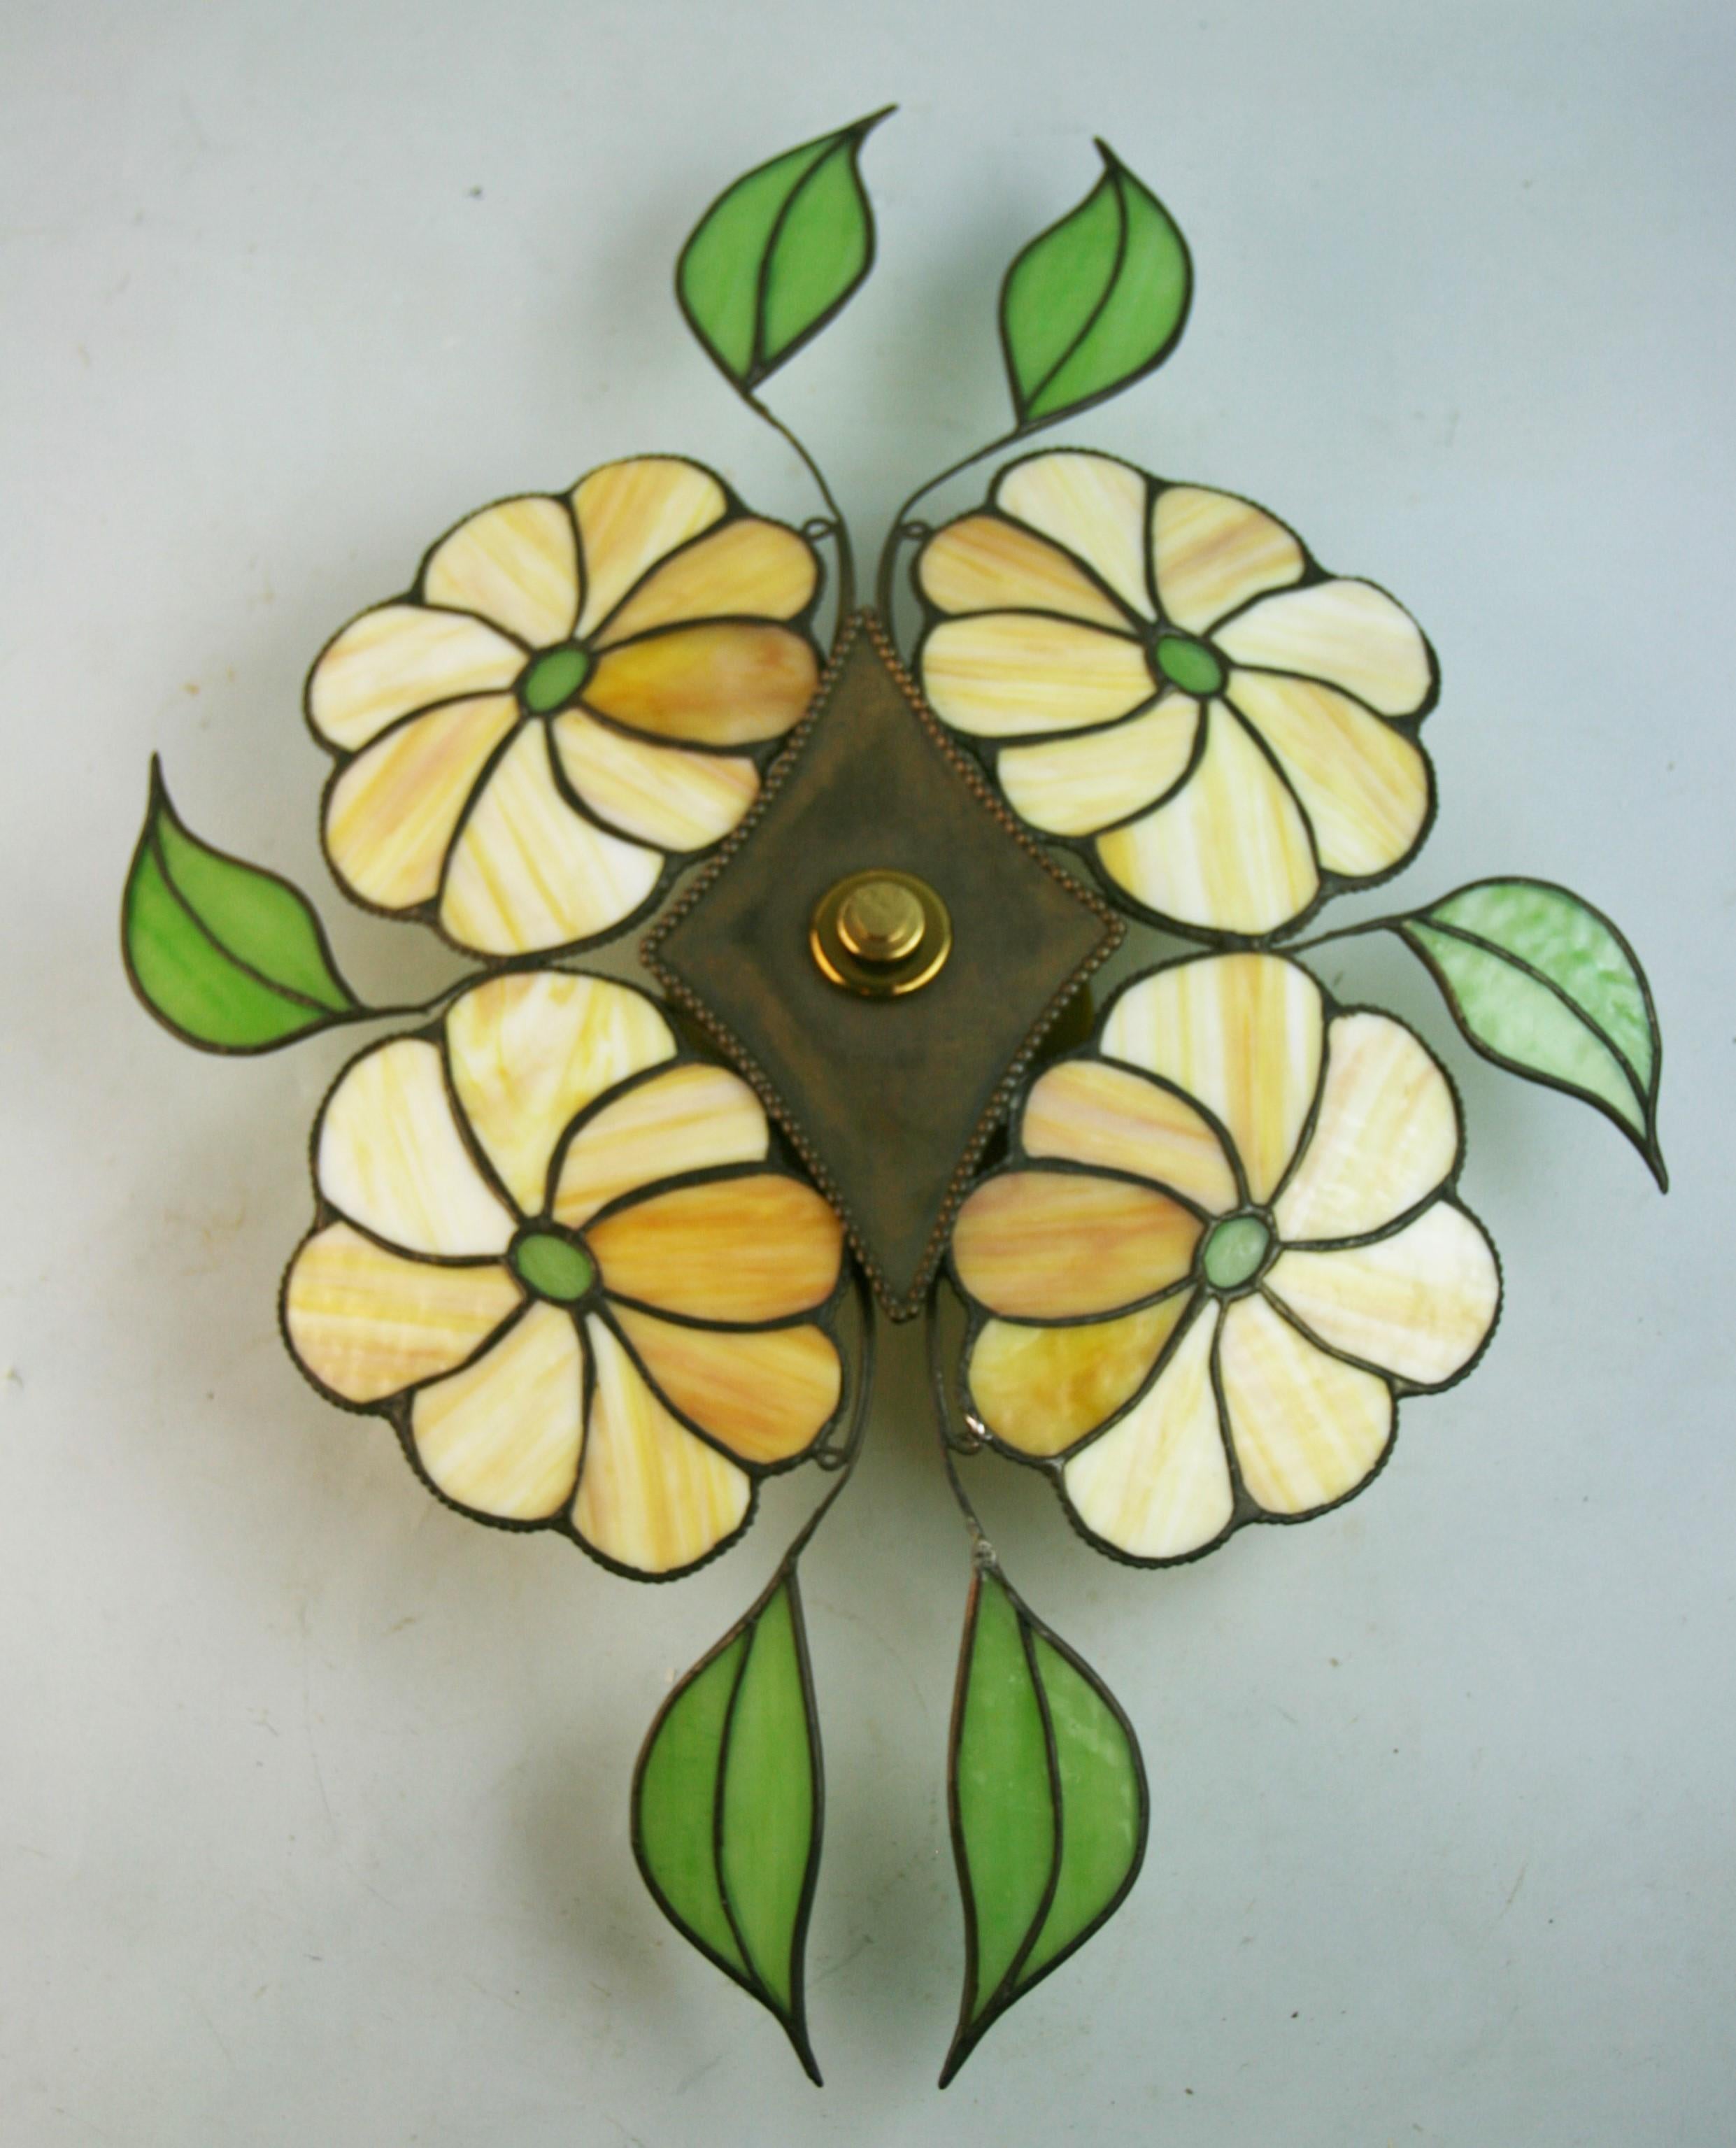 1431 Stained glass leaves and flower flush mount /wall light
2 light